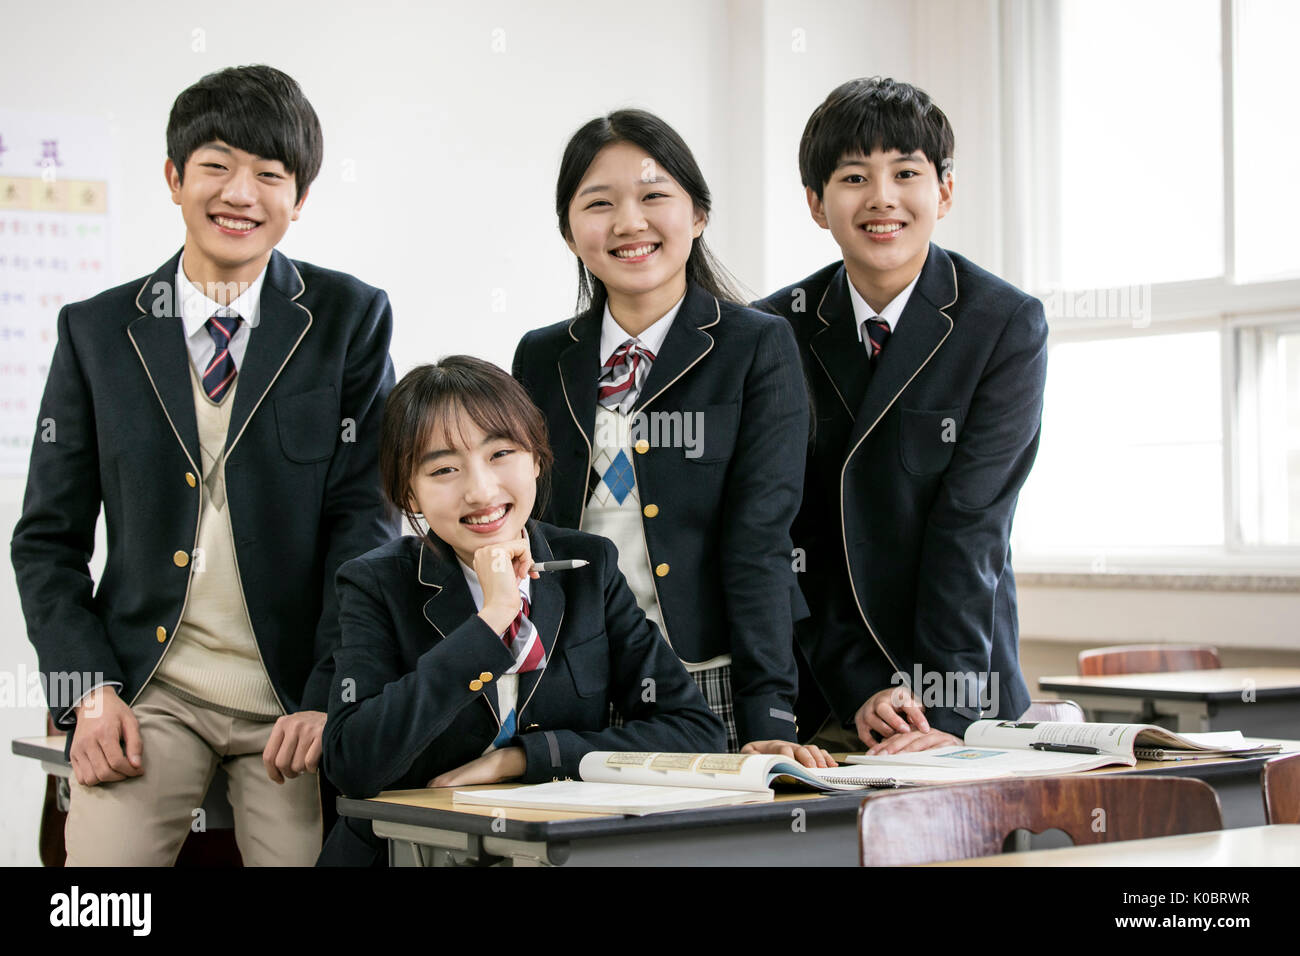 Four smiling school students posing in classroom Stock Photo